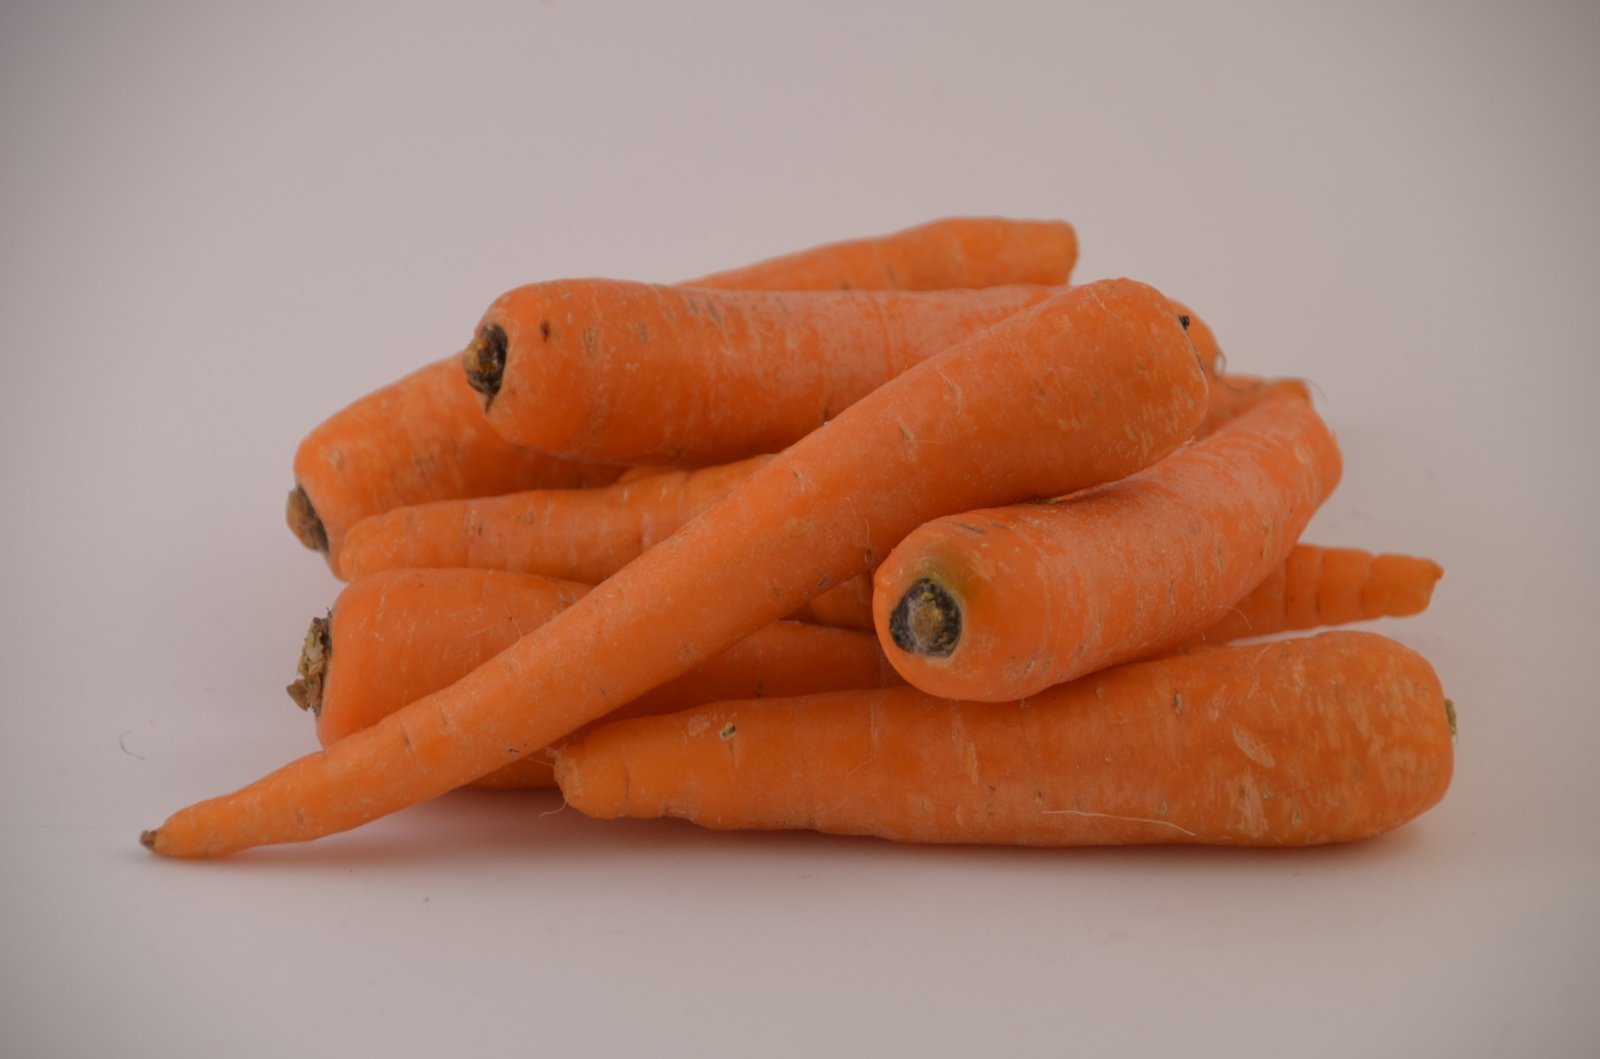 How to Blanch Carrots for Freezing